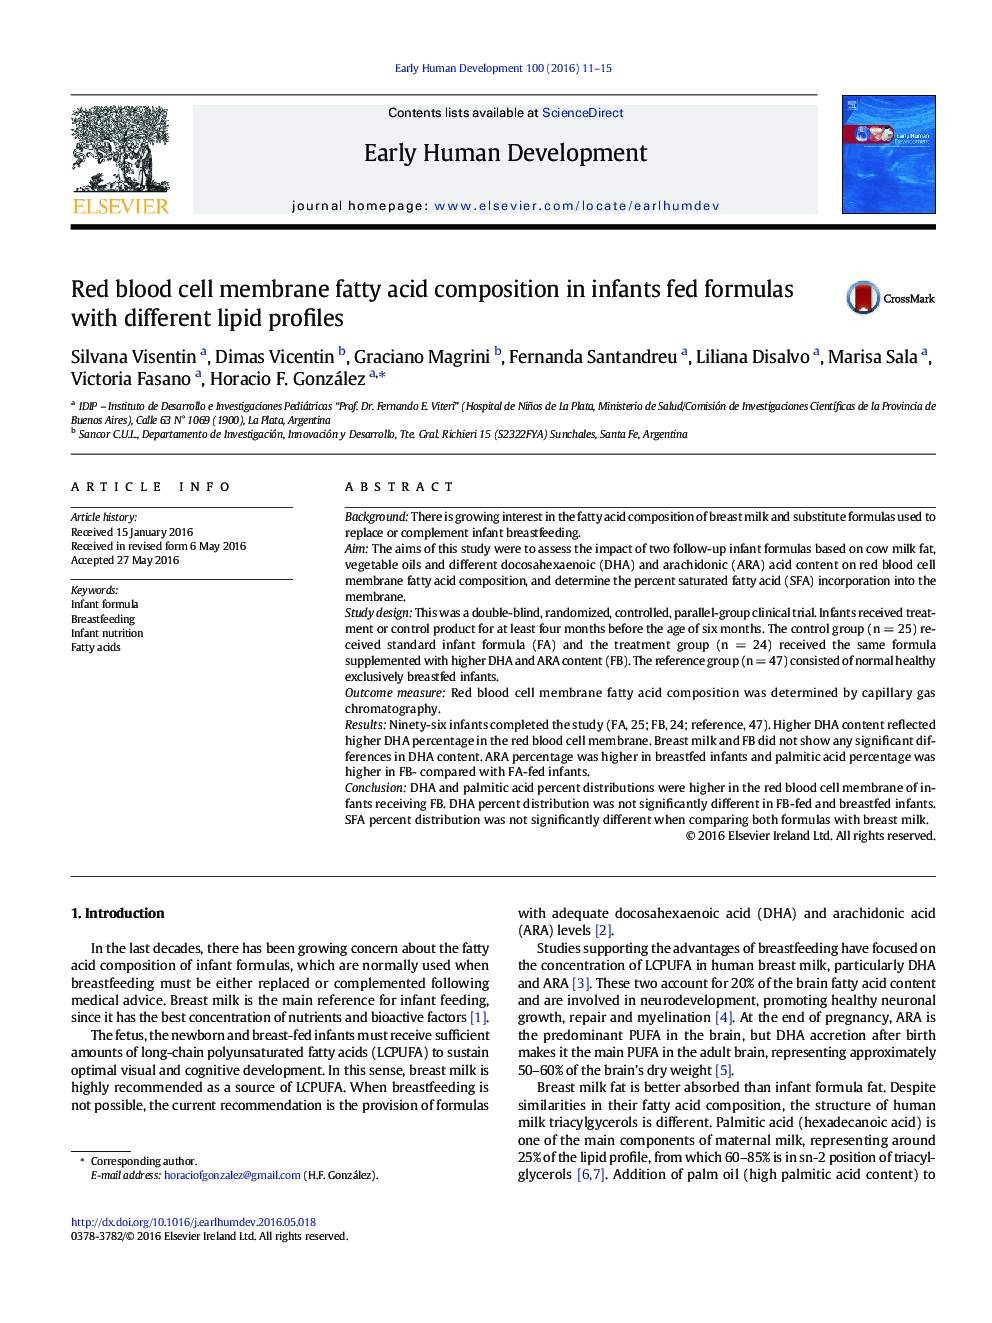 Red blood cell membrane fatty acid composition in infants fed formulas with different lipid profiles